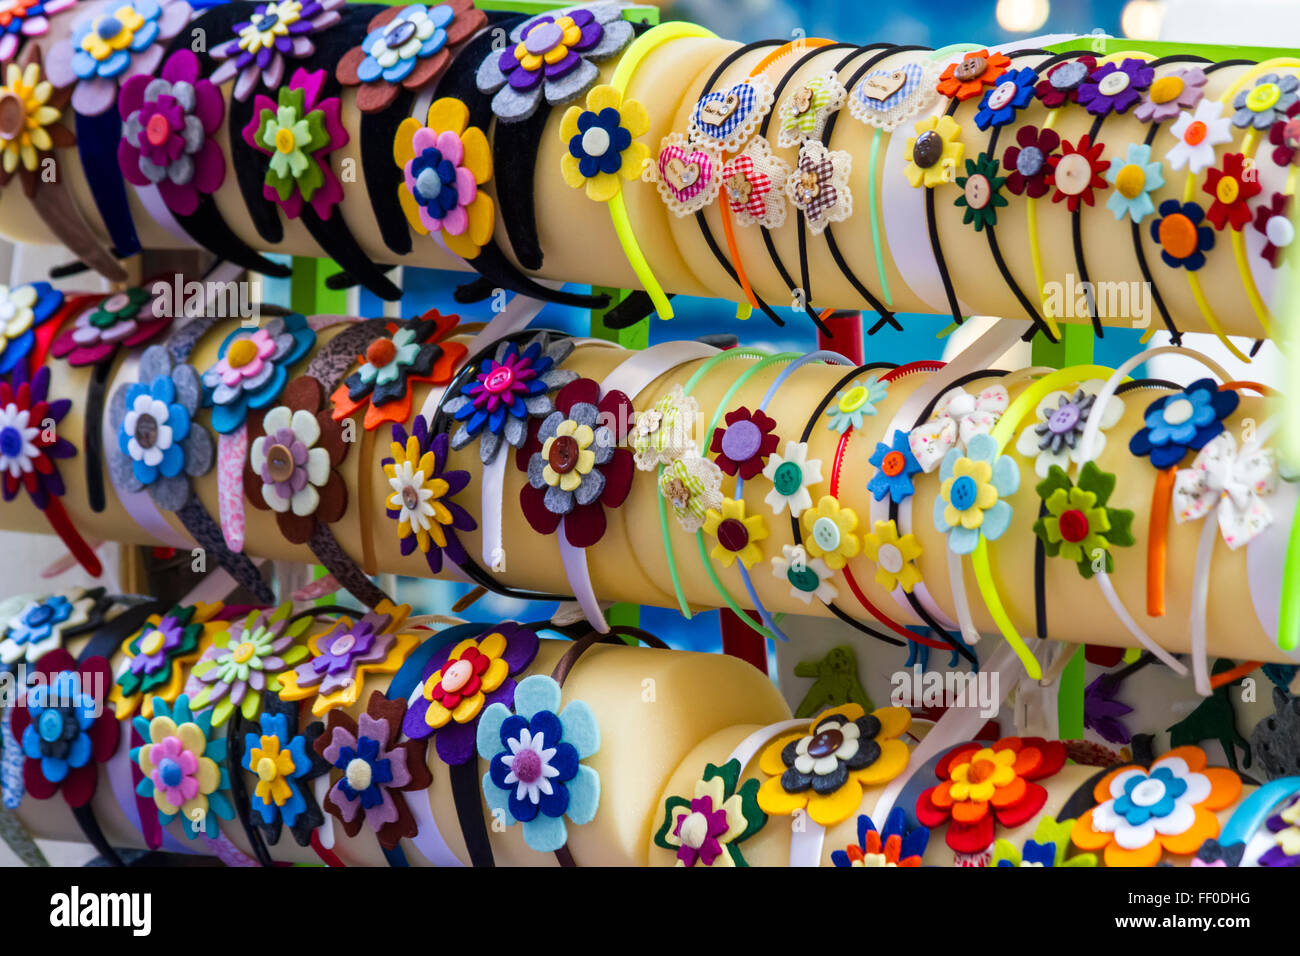 Colorful Hair Bands on the market Stock Photo